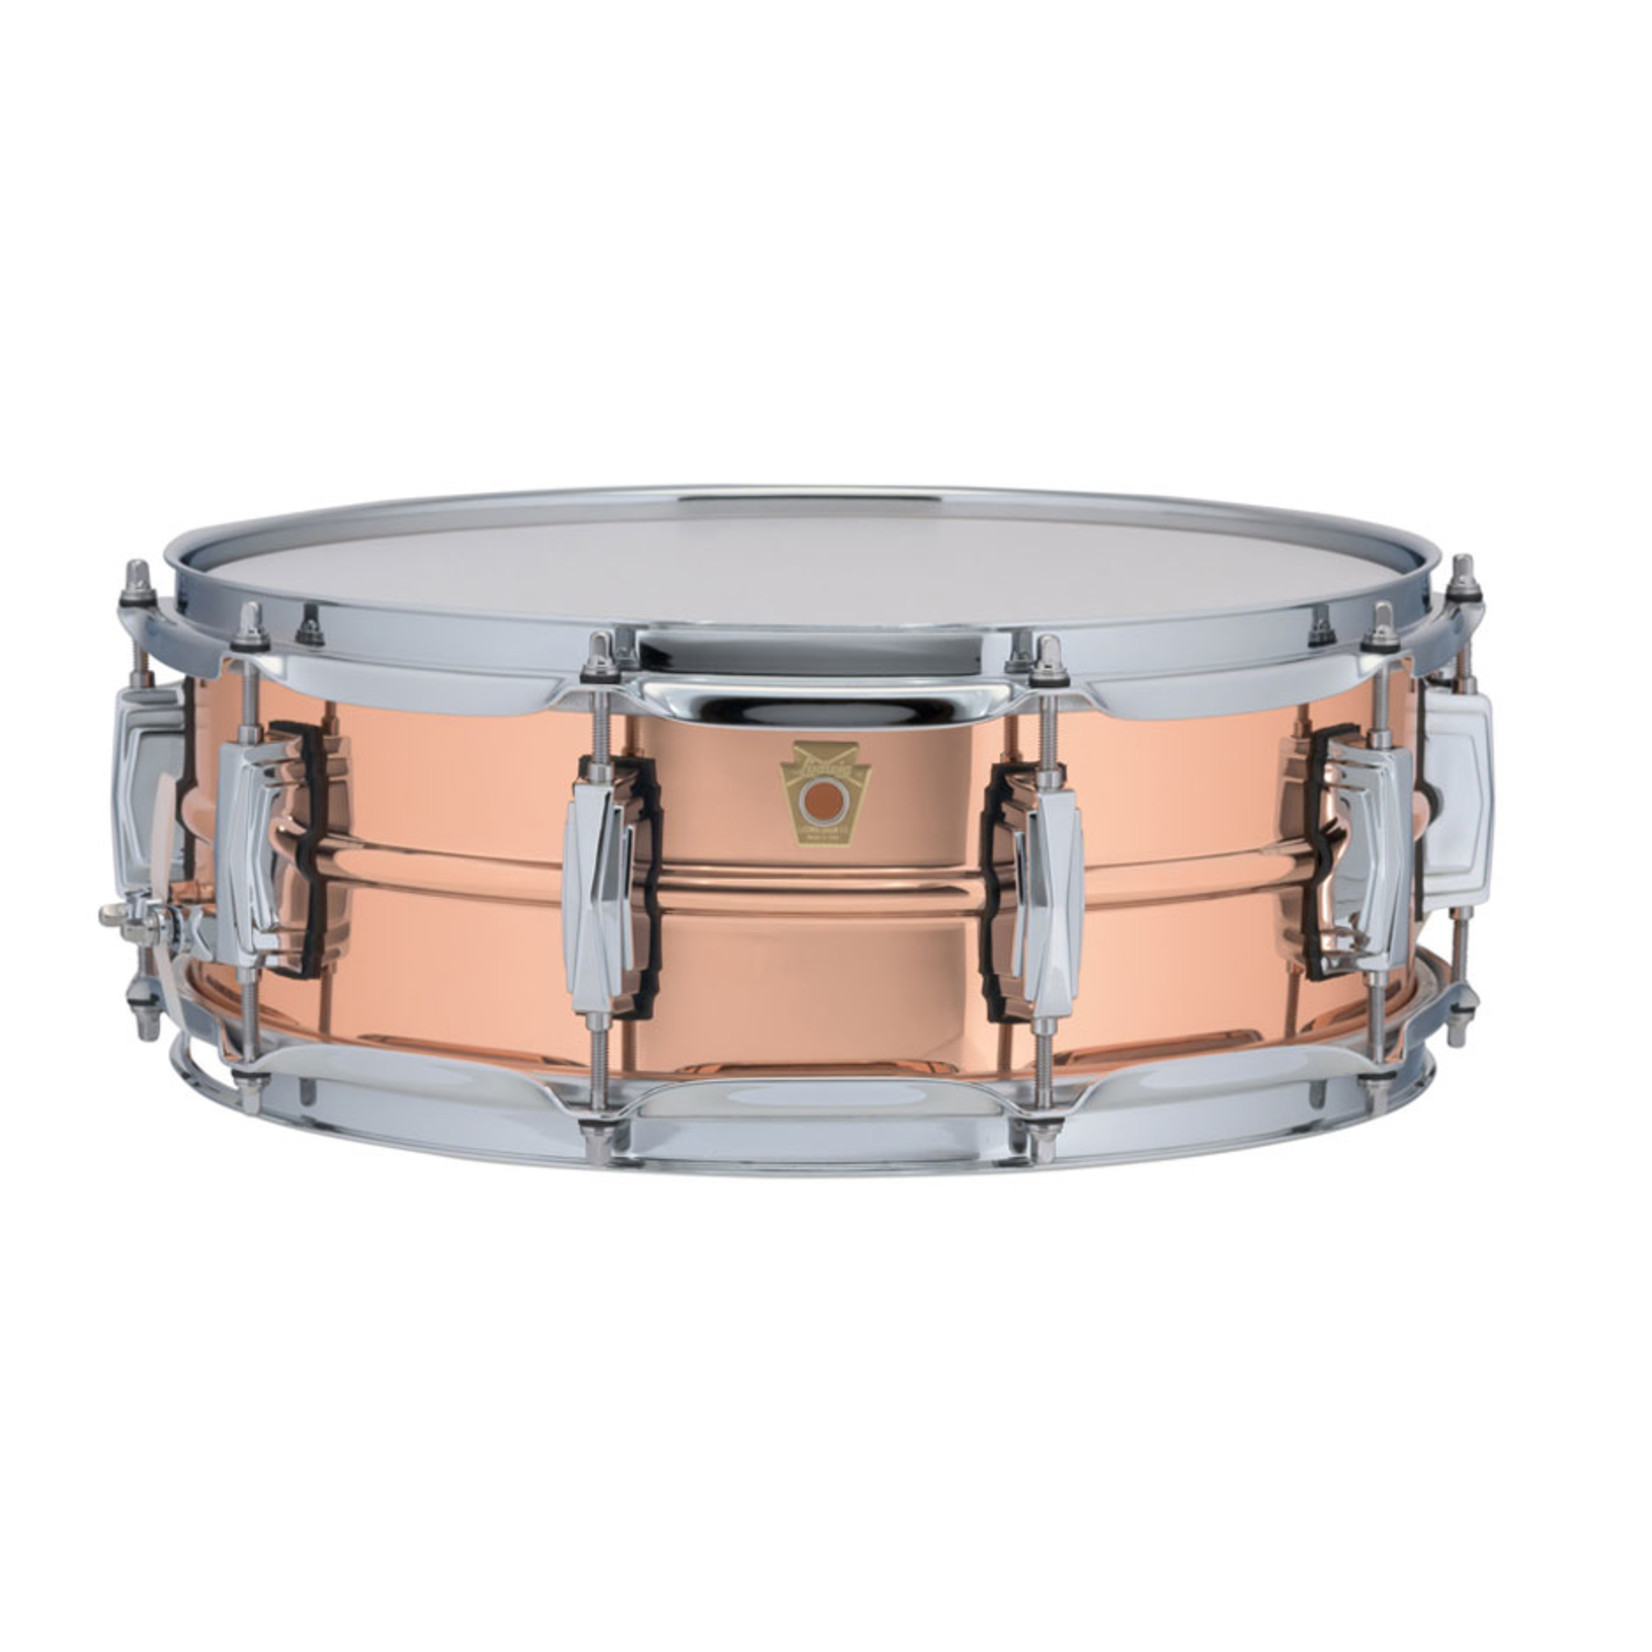 Ludwig Ludwig 5X14 Copper Phonic Snare Drum / Imperial Lugs / Smooth Shell